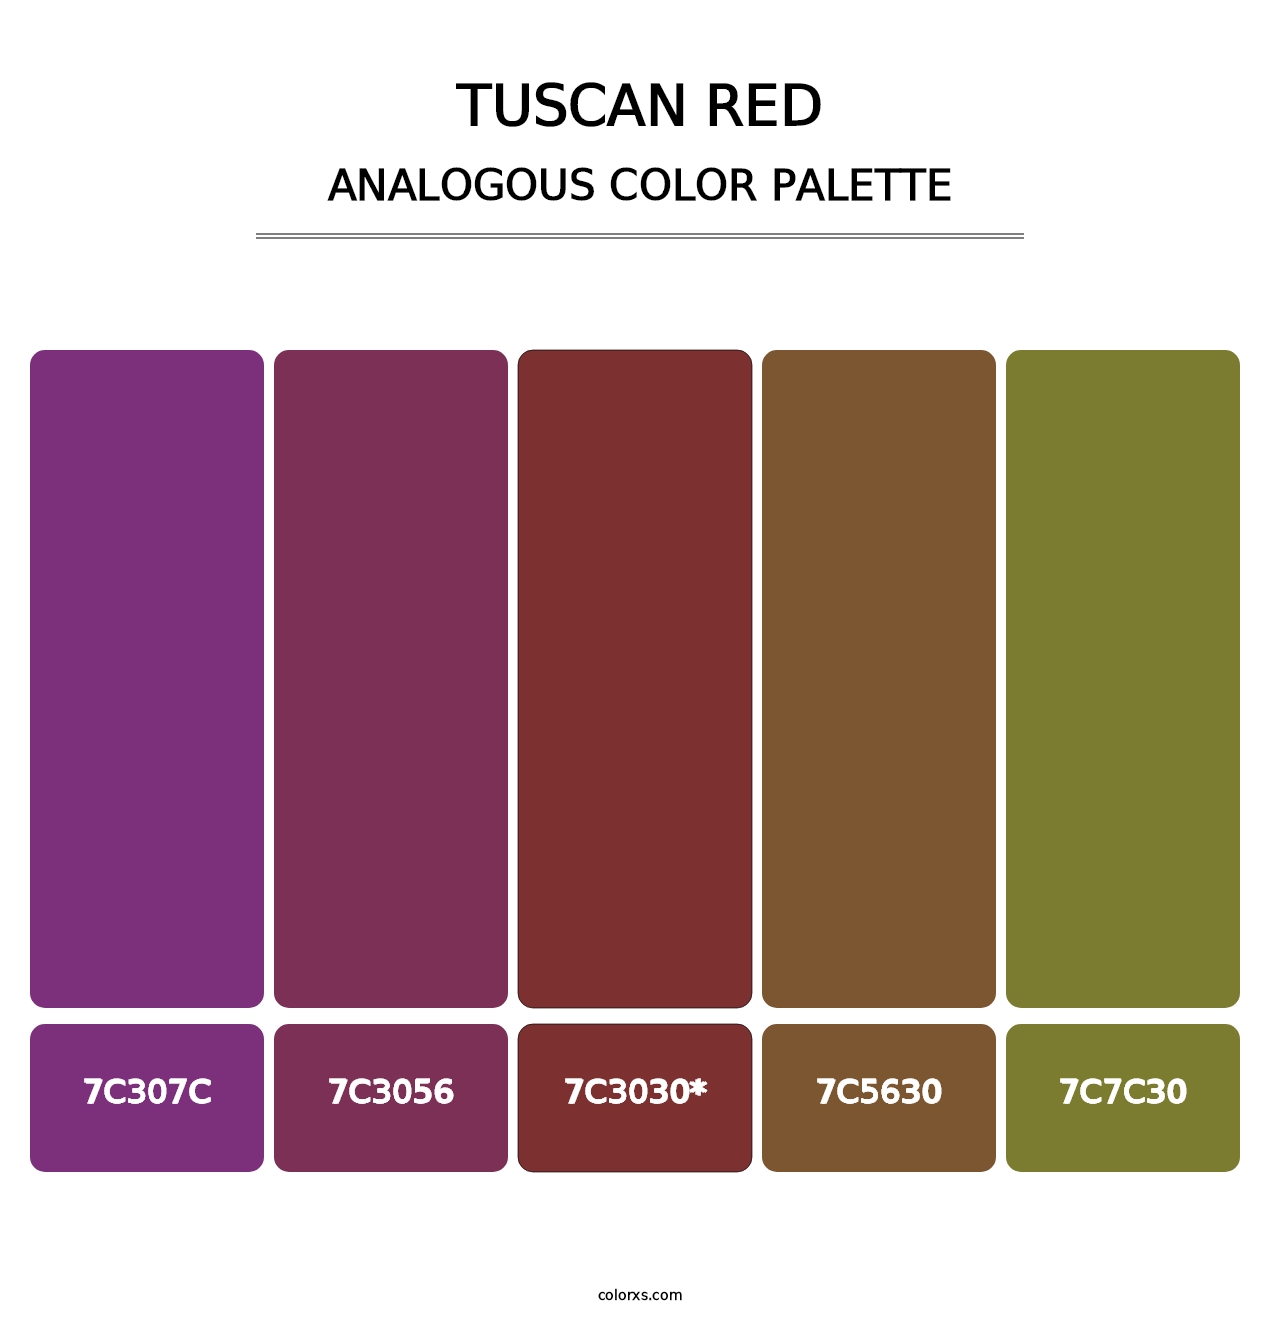 Tuscan Red - Analogous Color Palette